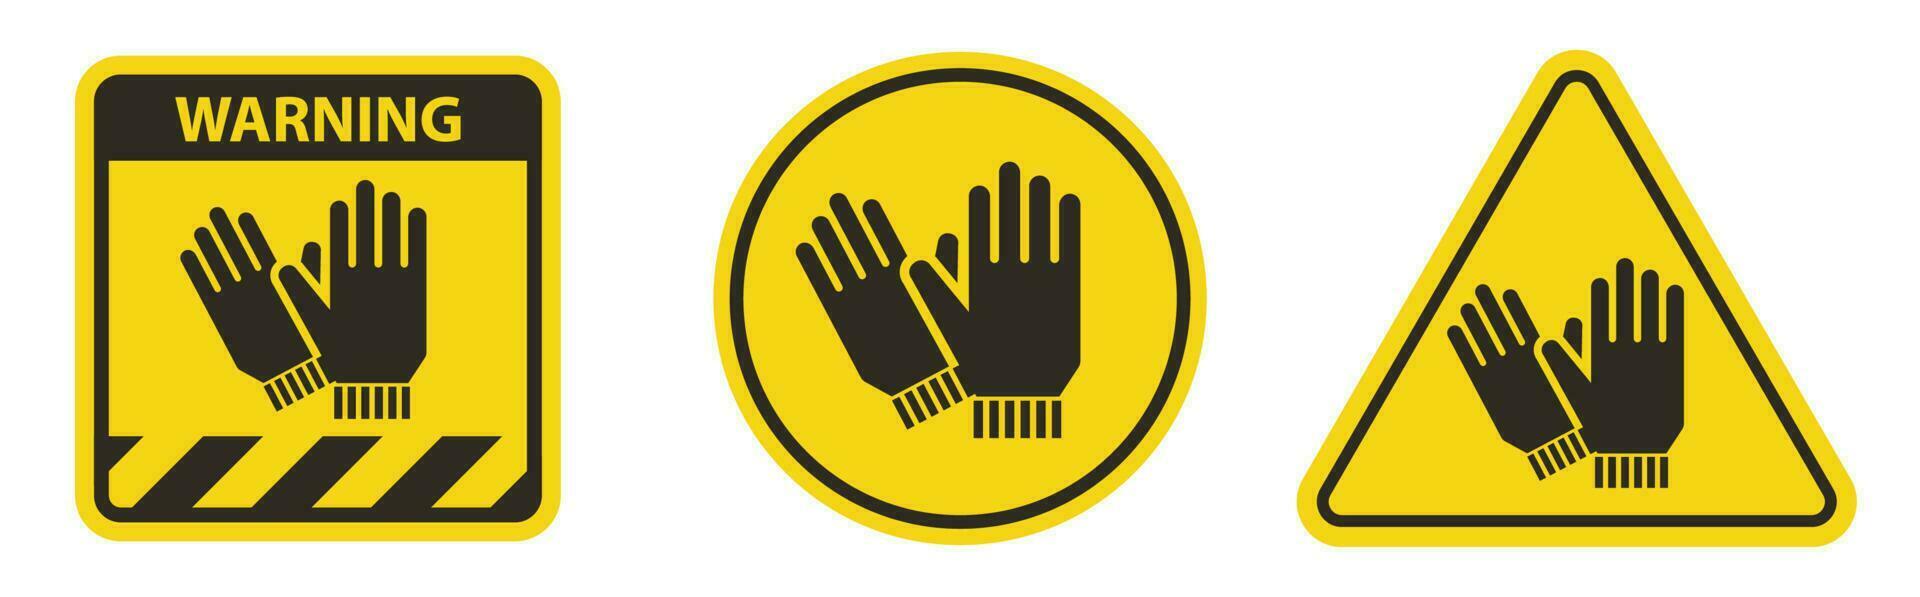 Hand Protection Required Sign On White Background vector